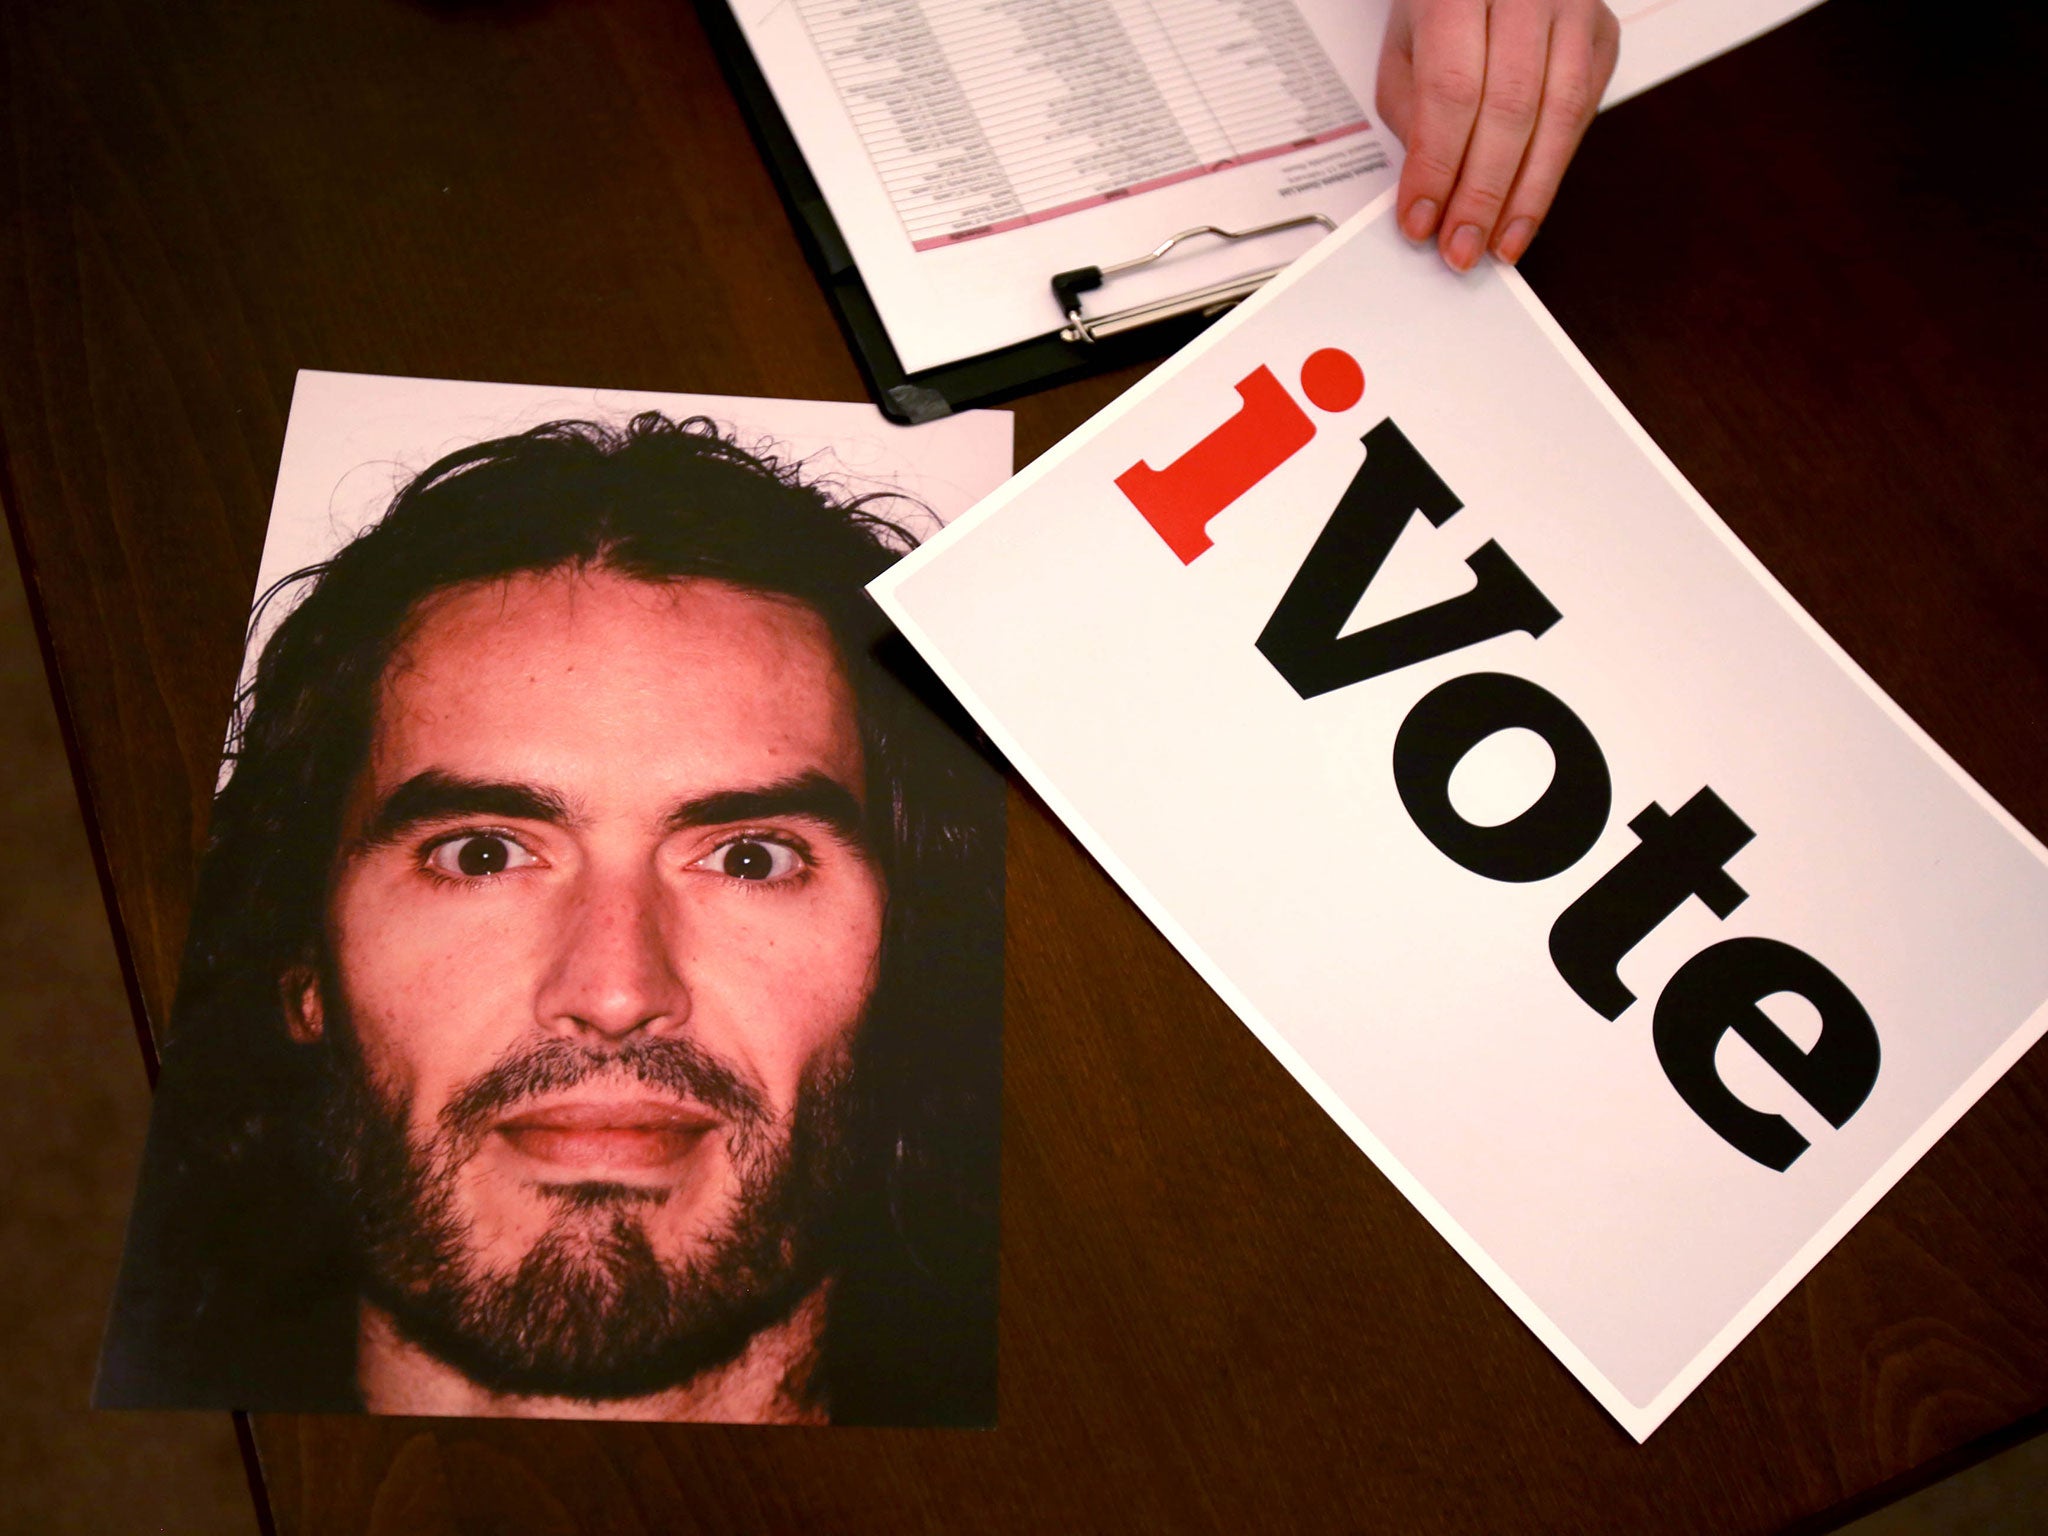 Students used Russell Brand face cards to wave support for motions